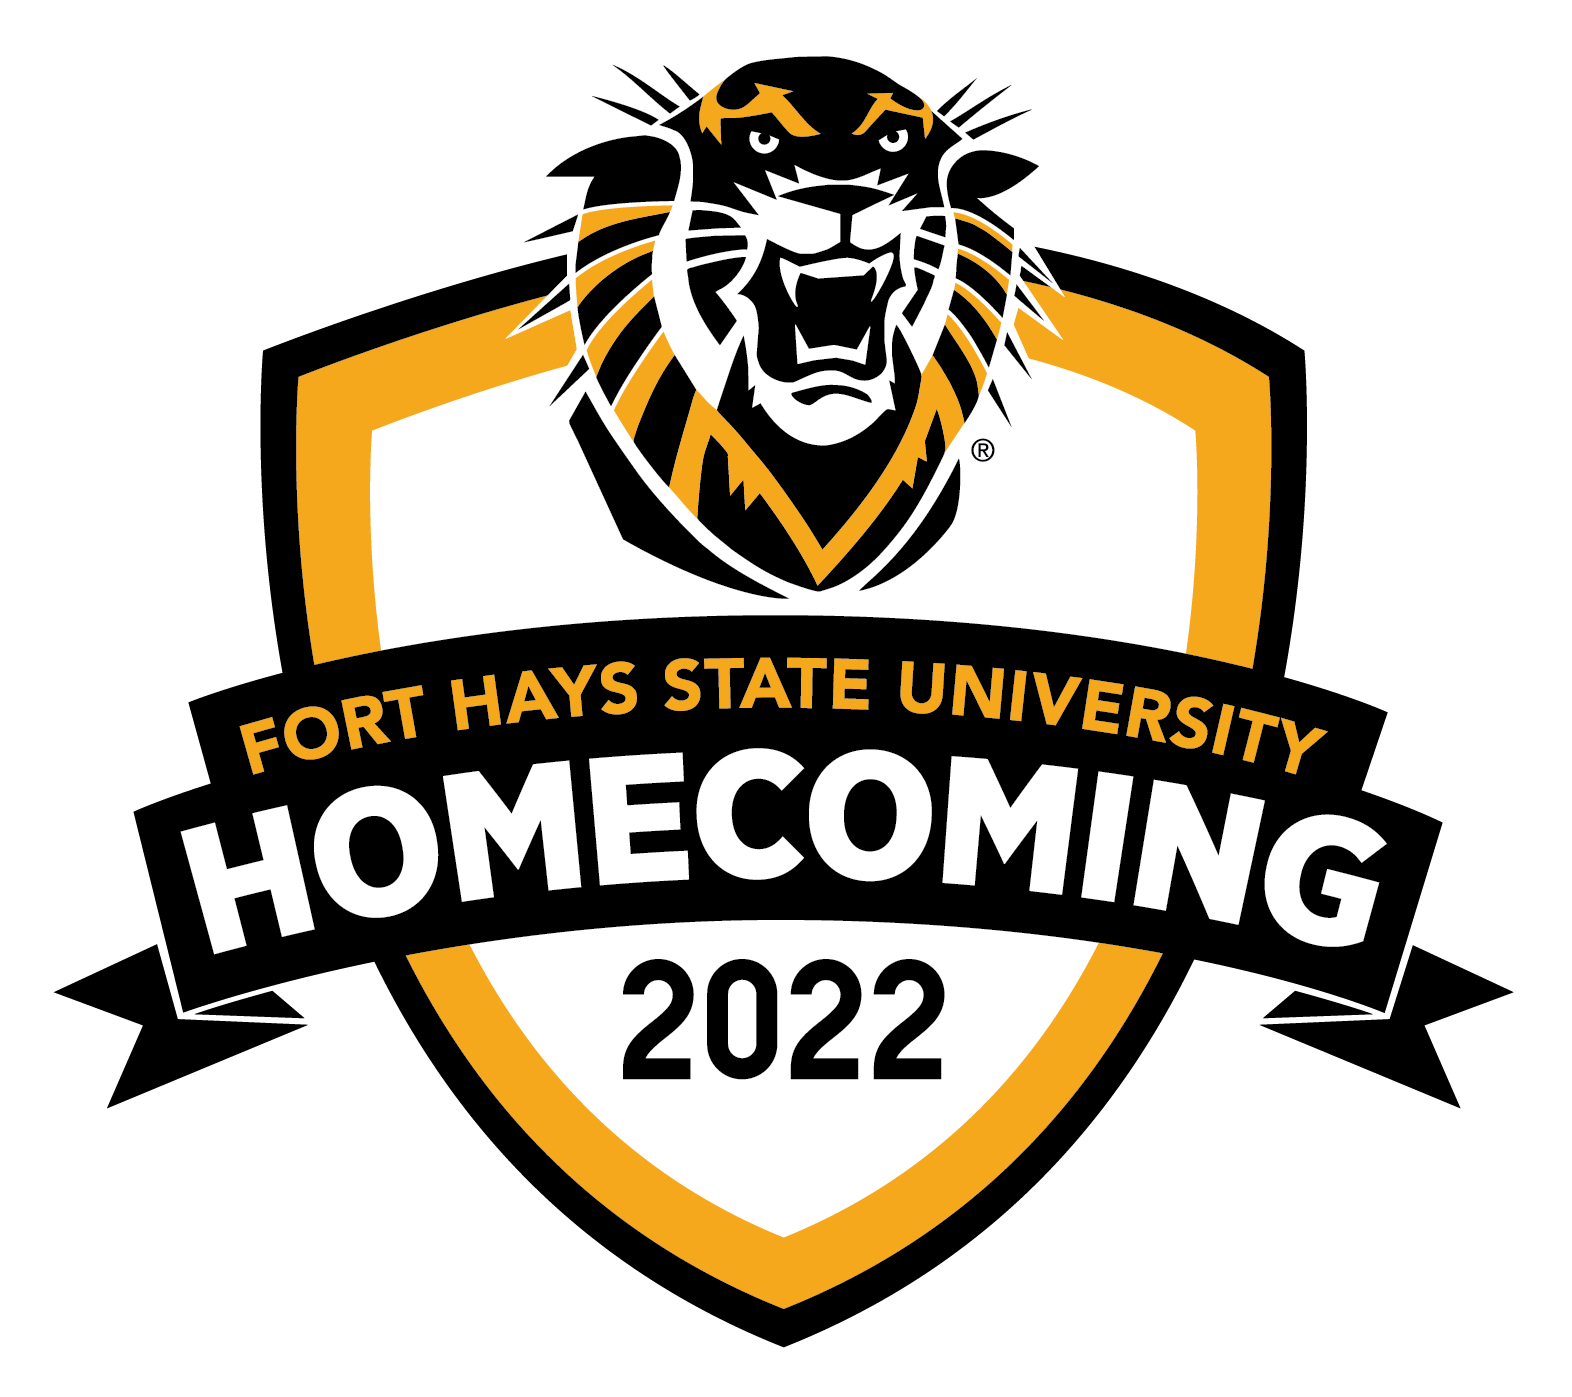 Fort Hays State announces 2022 events Fort Hays State